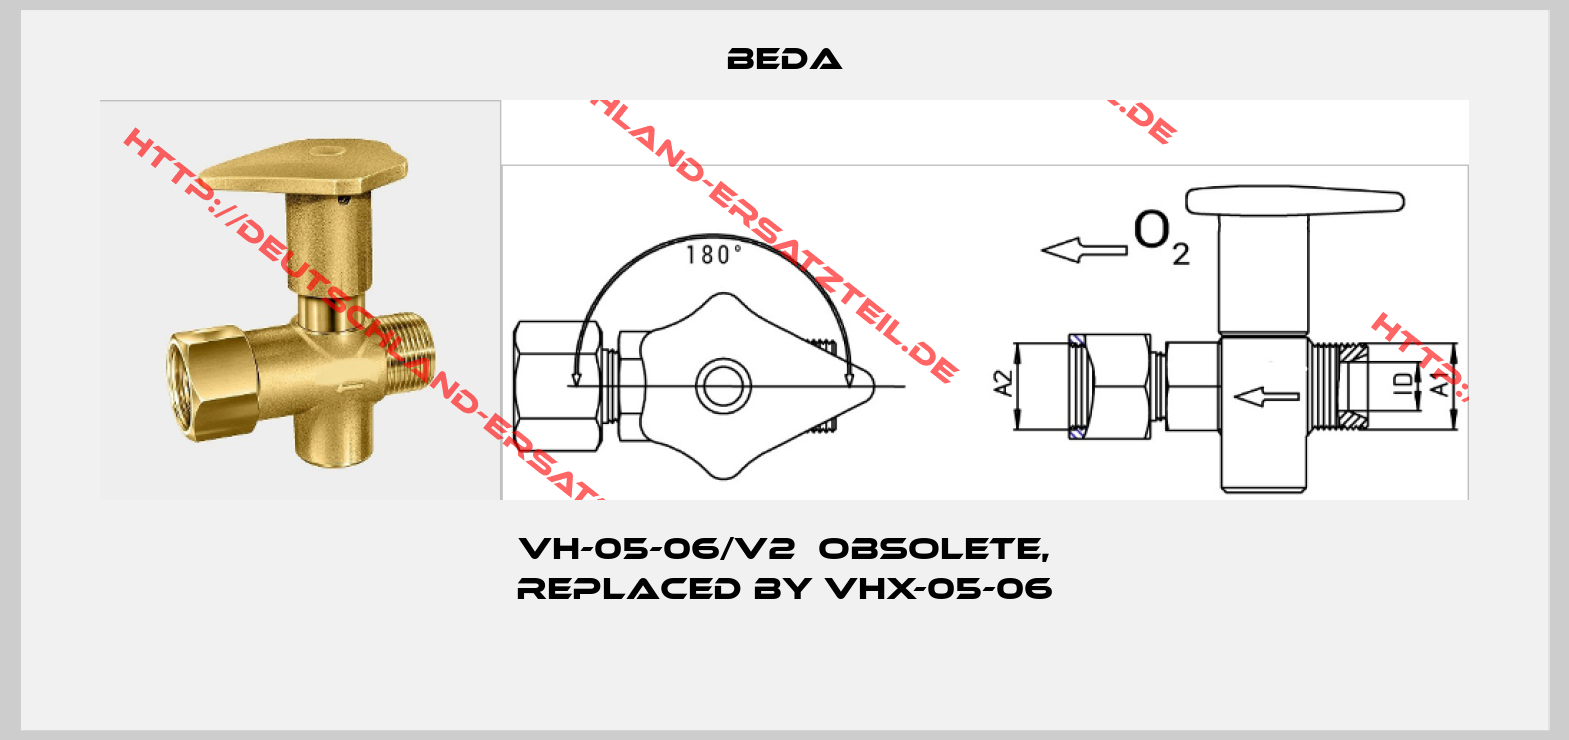 BEDA-VH-05-06/V2  obsolete, replaced by VHX-05-06 